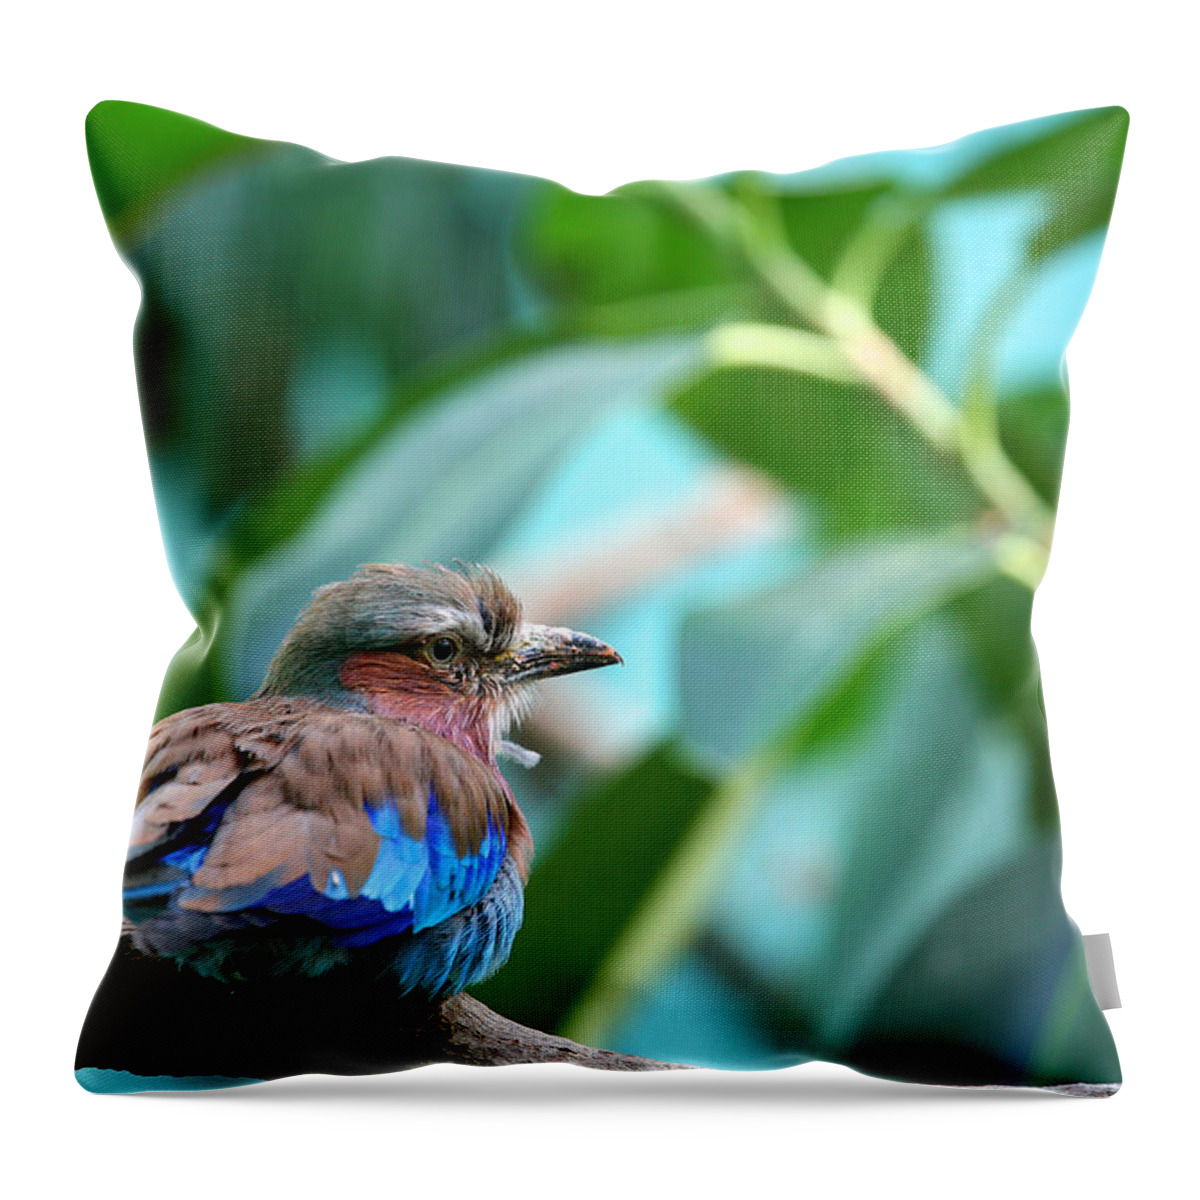 Lilac Breased Roller Throw Pillow featuring the photograph The Lilac Breasted Roller by Karol Livote